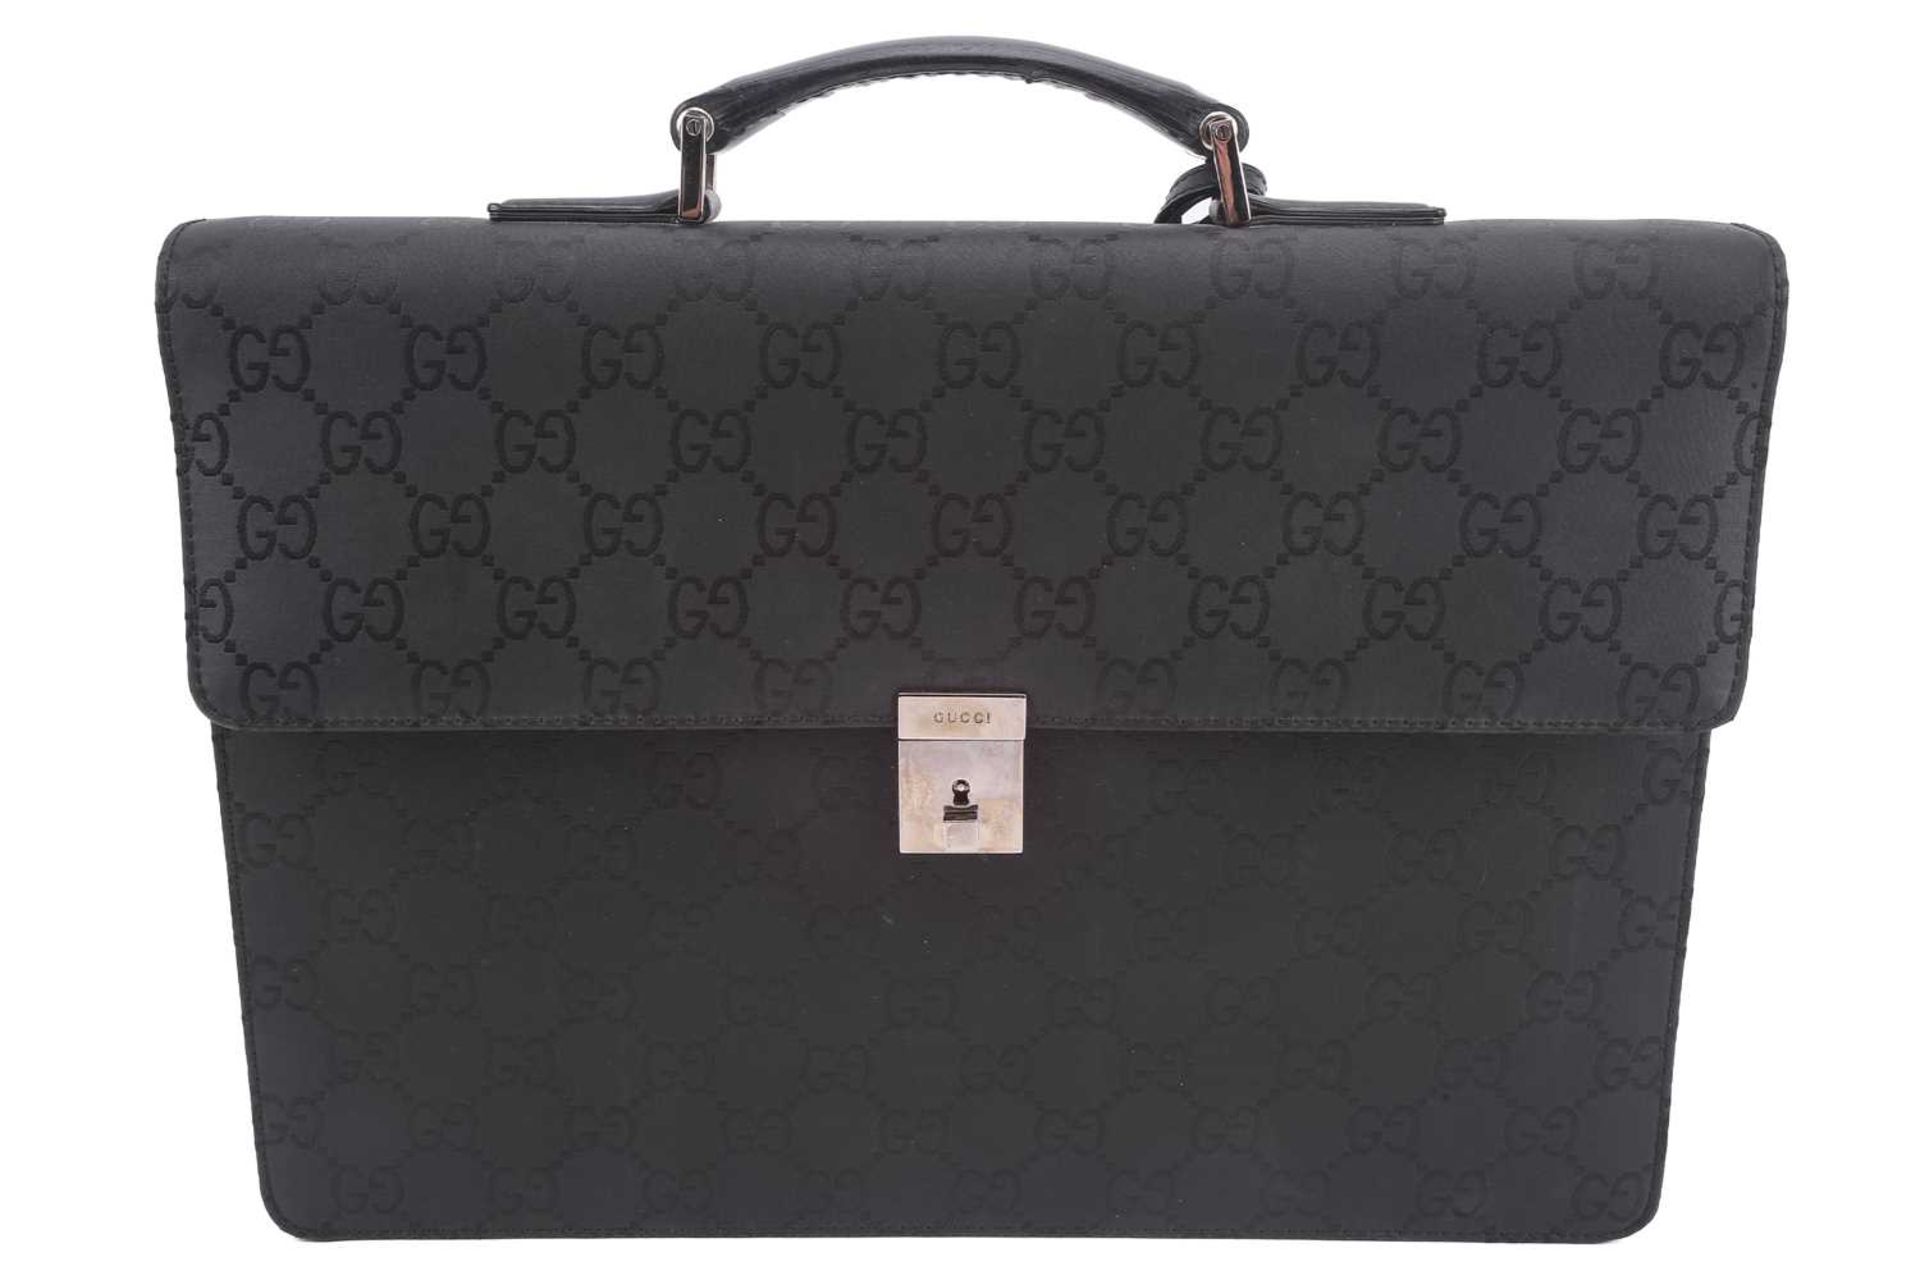 Gucci - a large briefcase in black jacquard nylon with black leather trims, flap fastens with a - Image 2 of 8